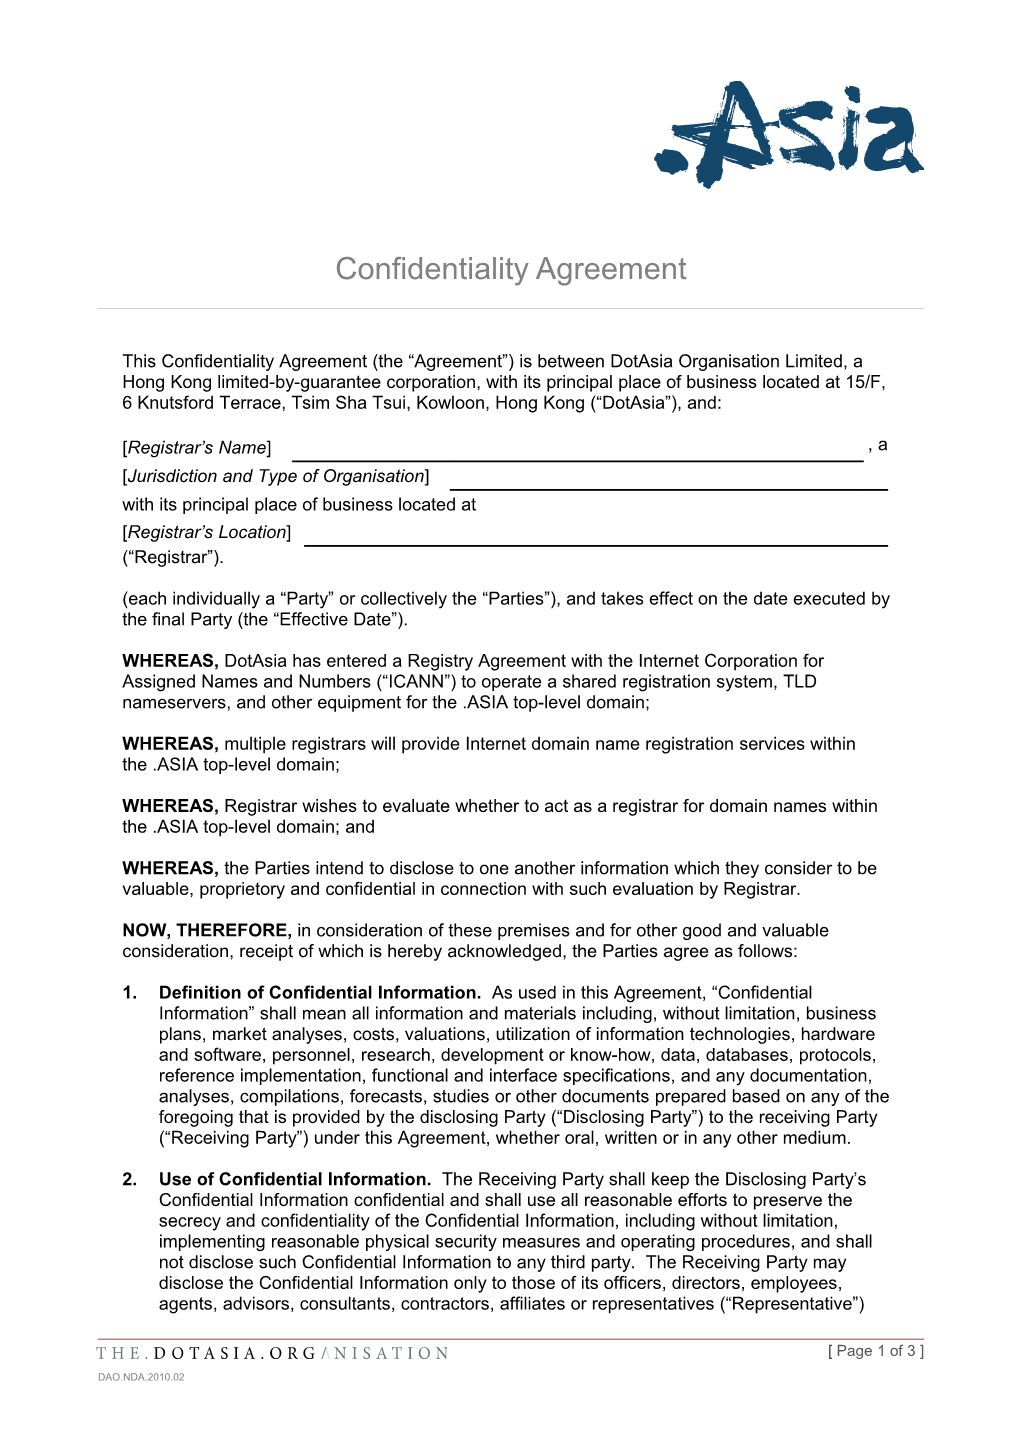 Confidentiality Agreement s12